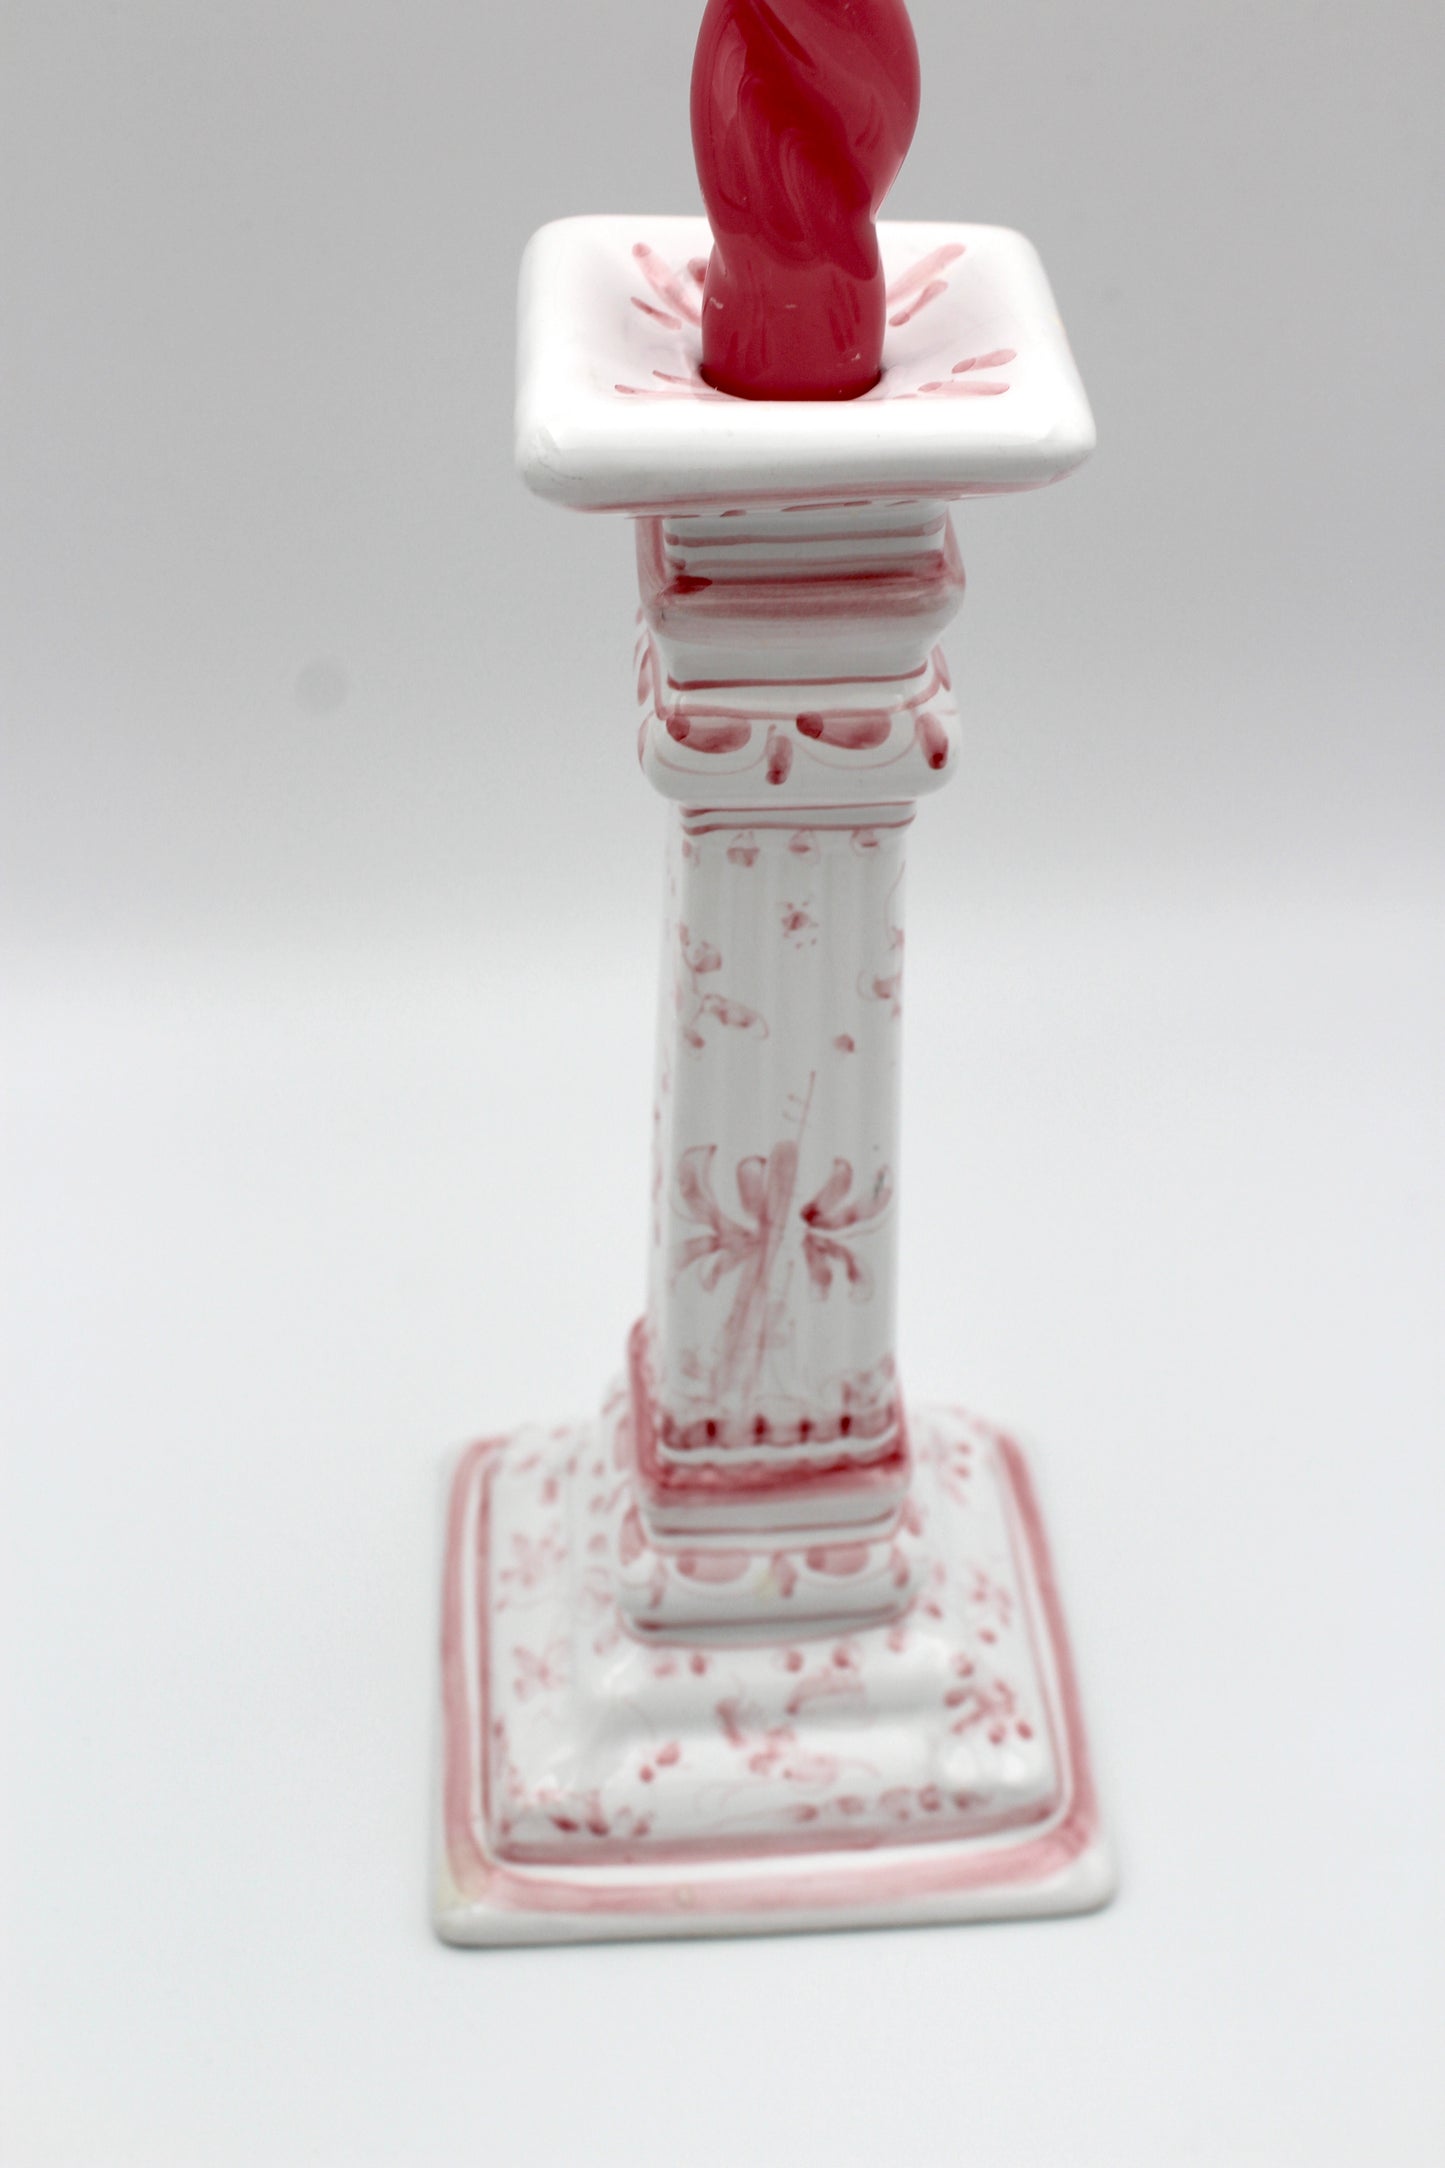 Portuguese Candlestick - Hand painted